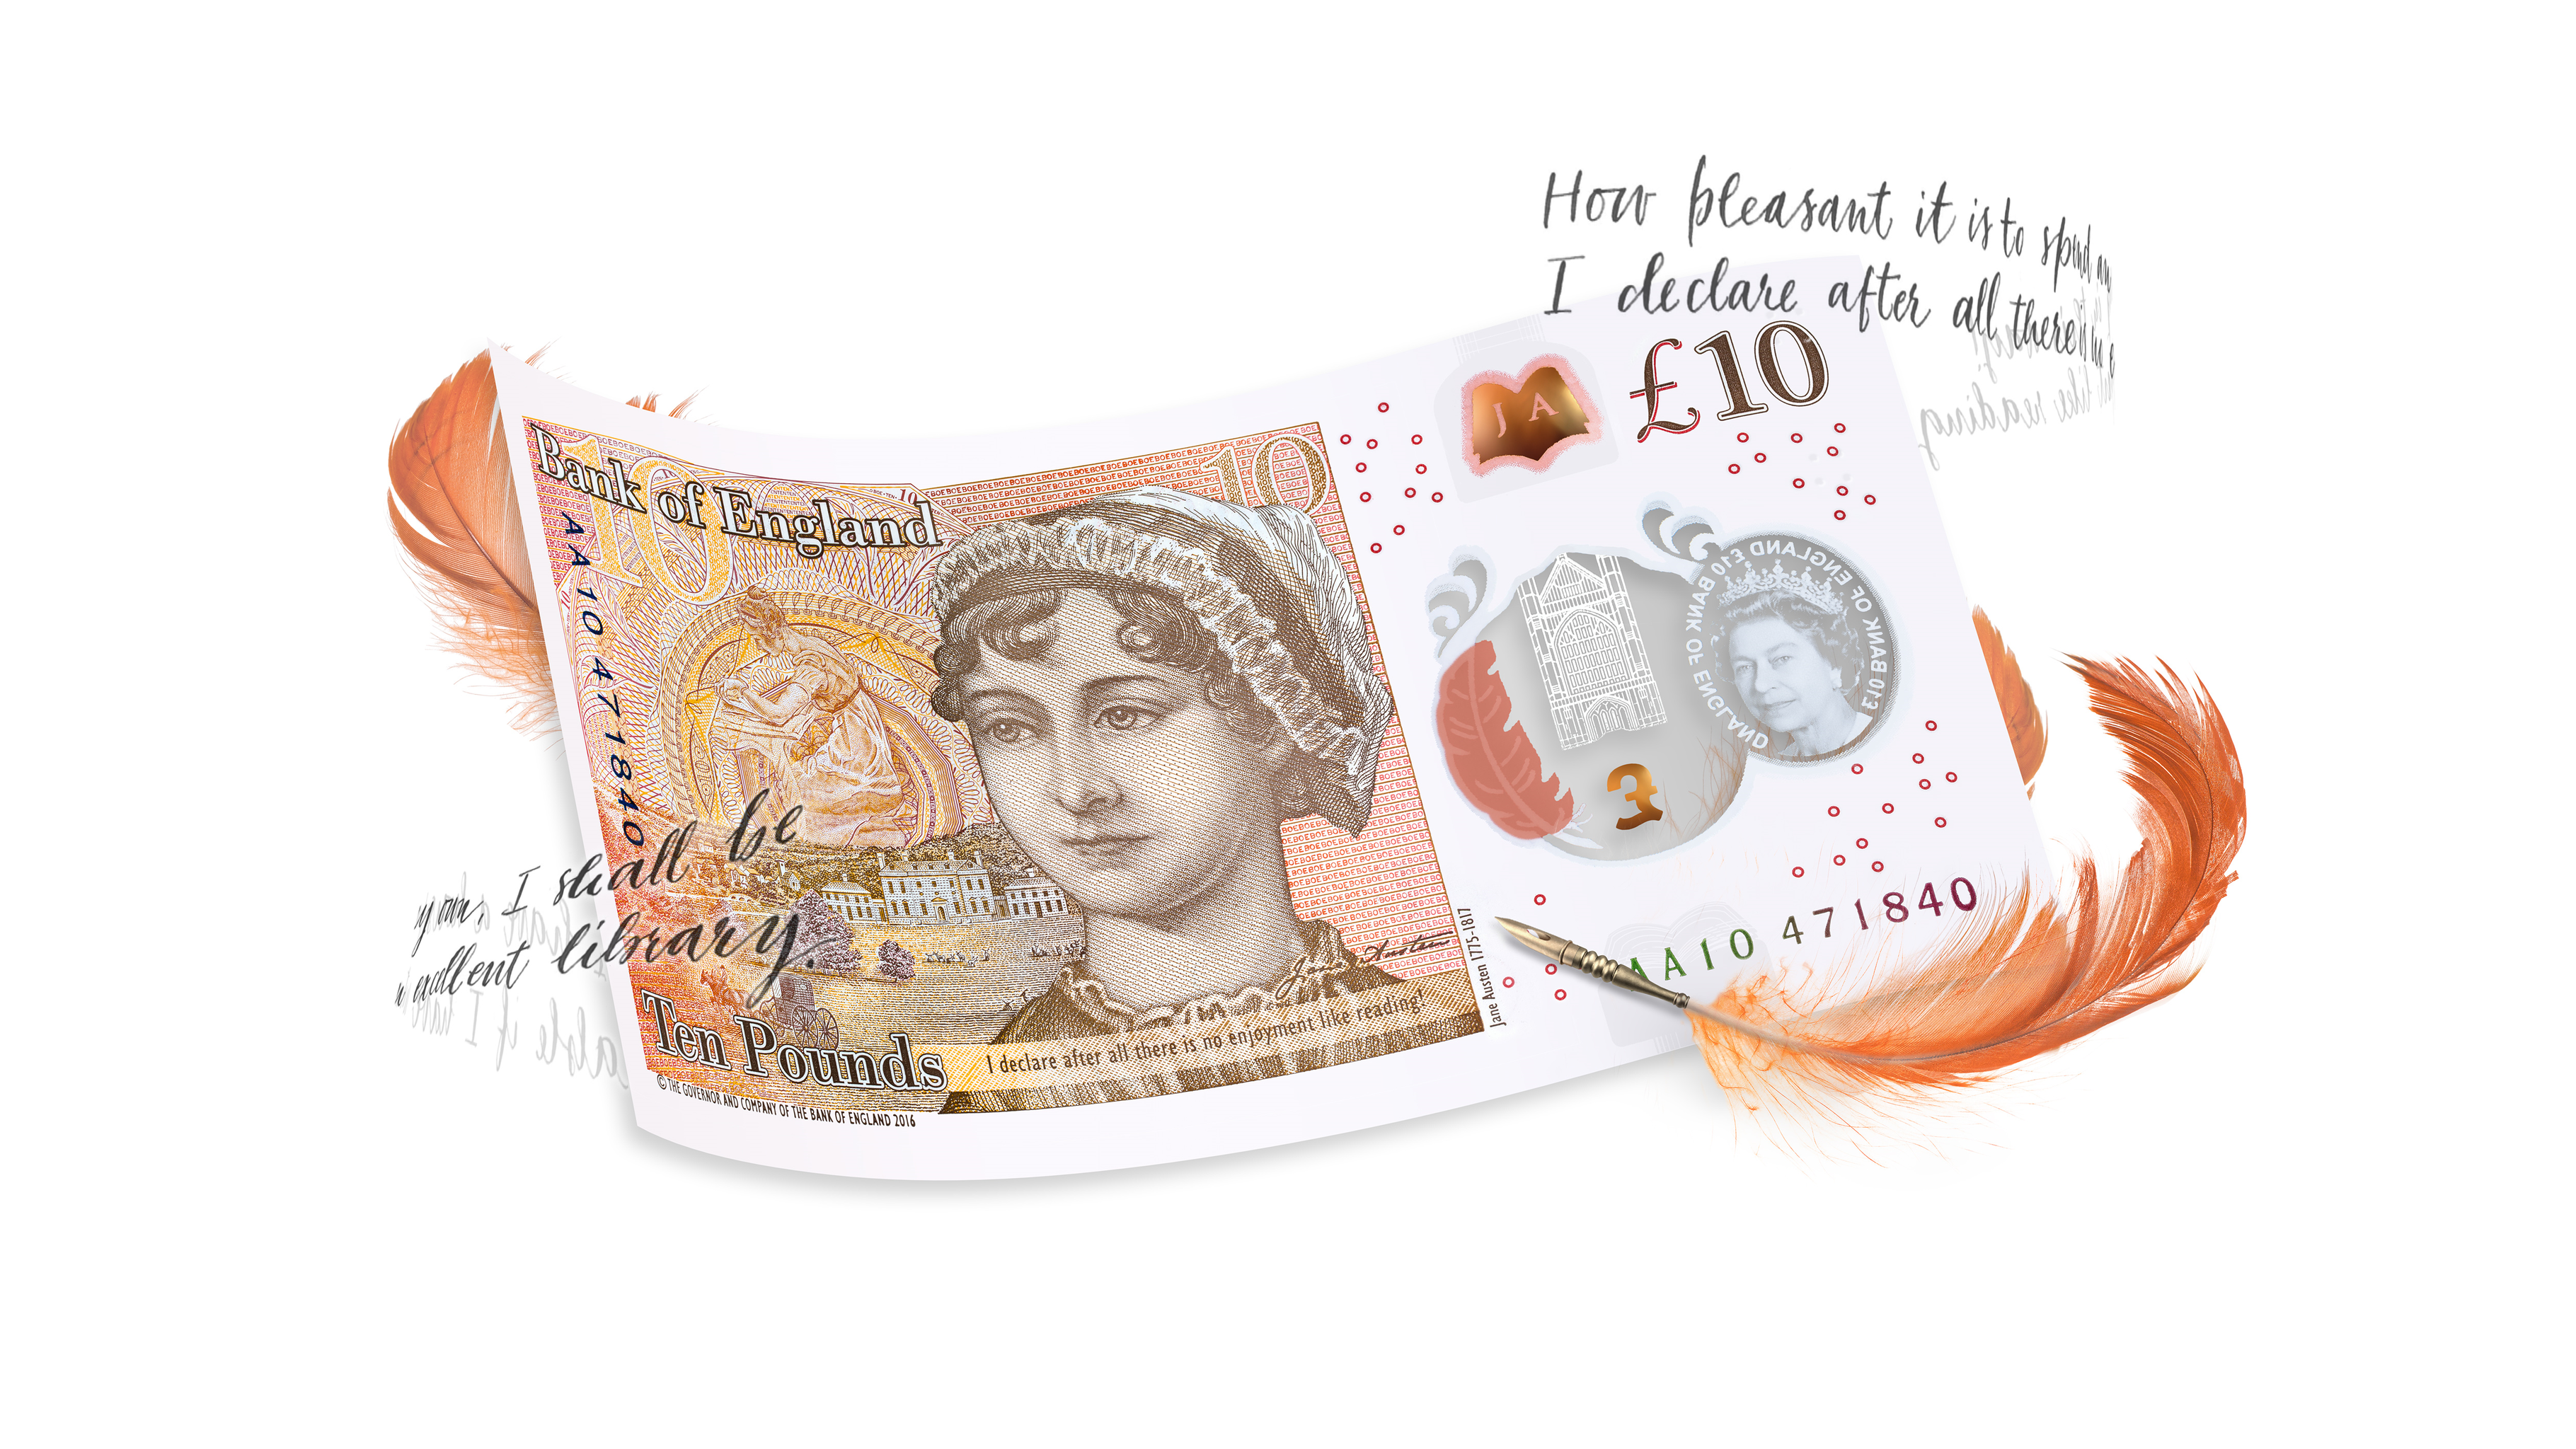 The New Tenner: Who is Jane Austen?